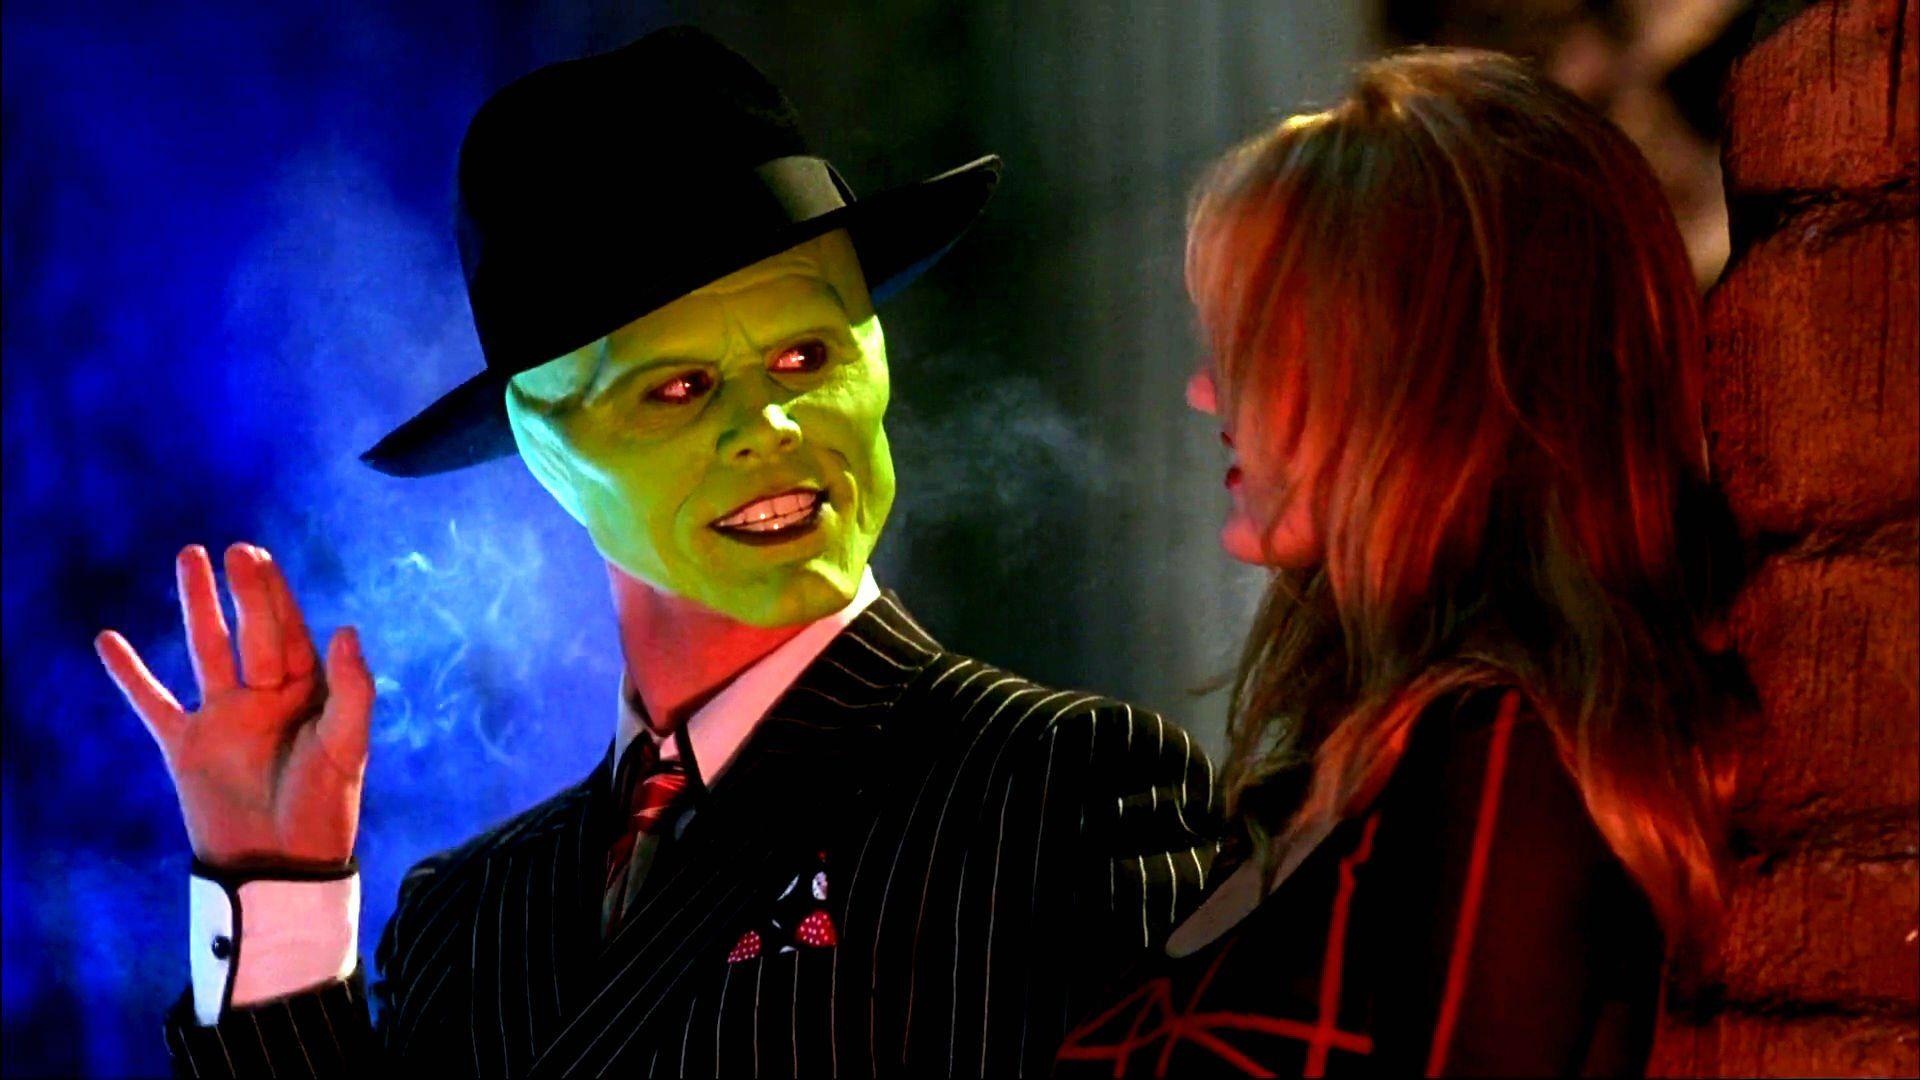 The Mask movie, Wallpapers, 1920x1080 Full HD Desktop